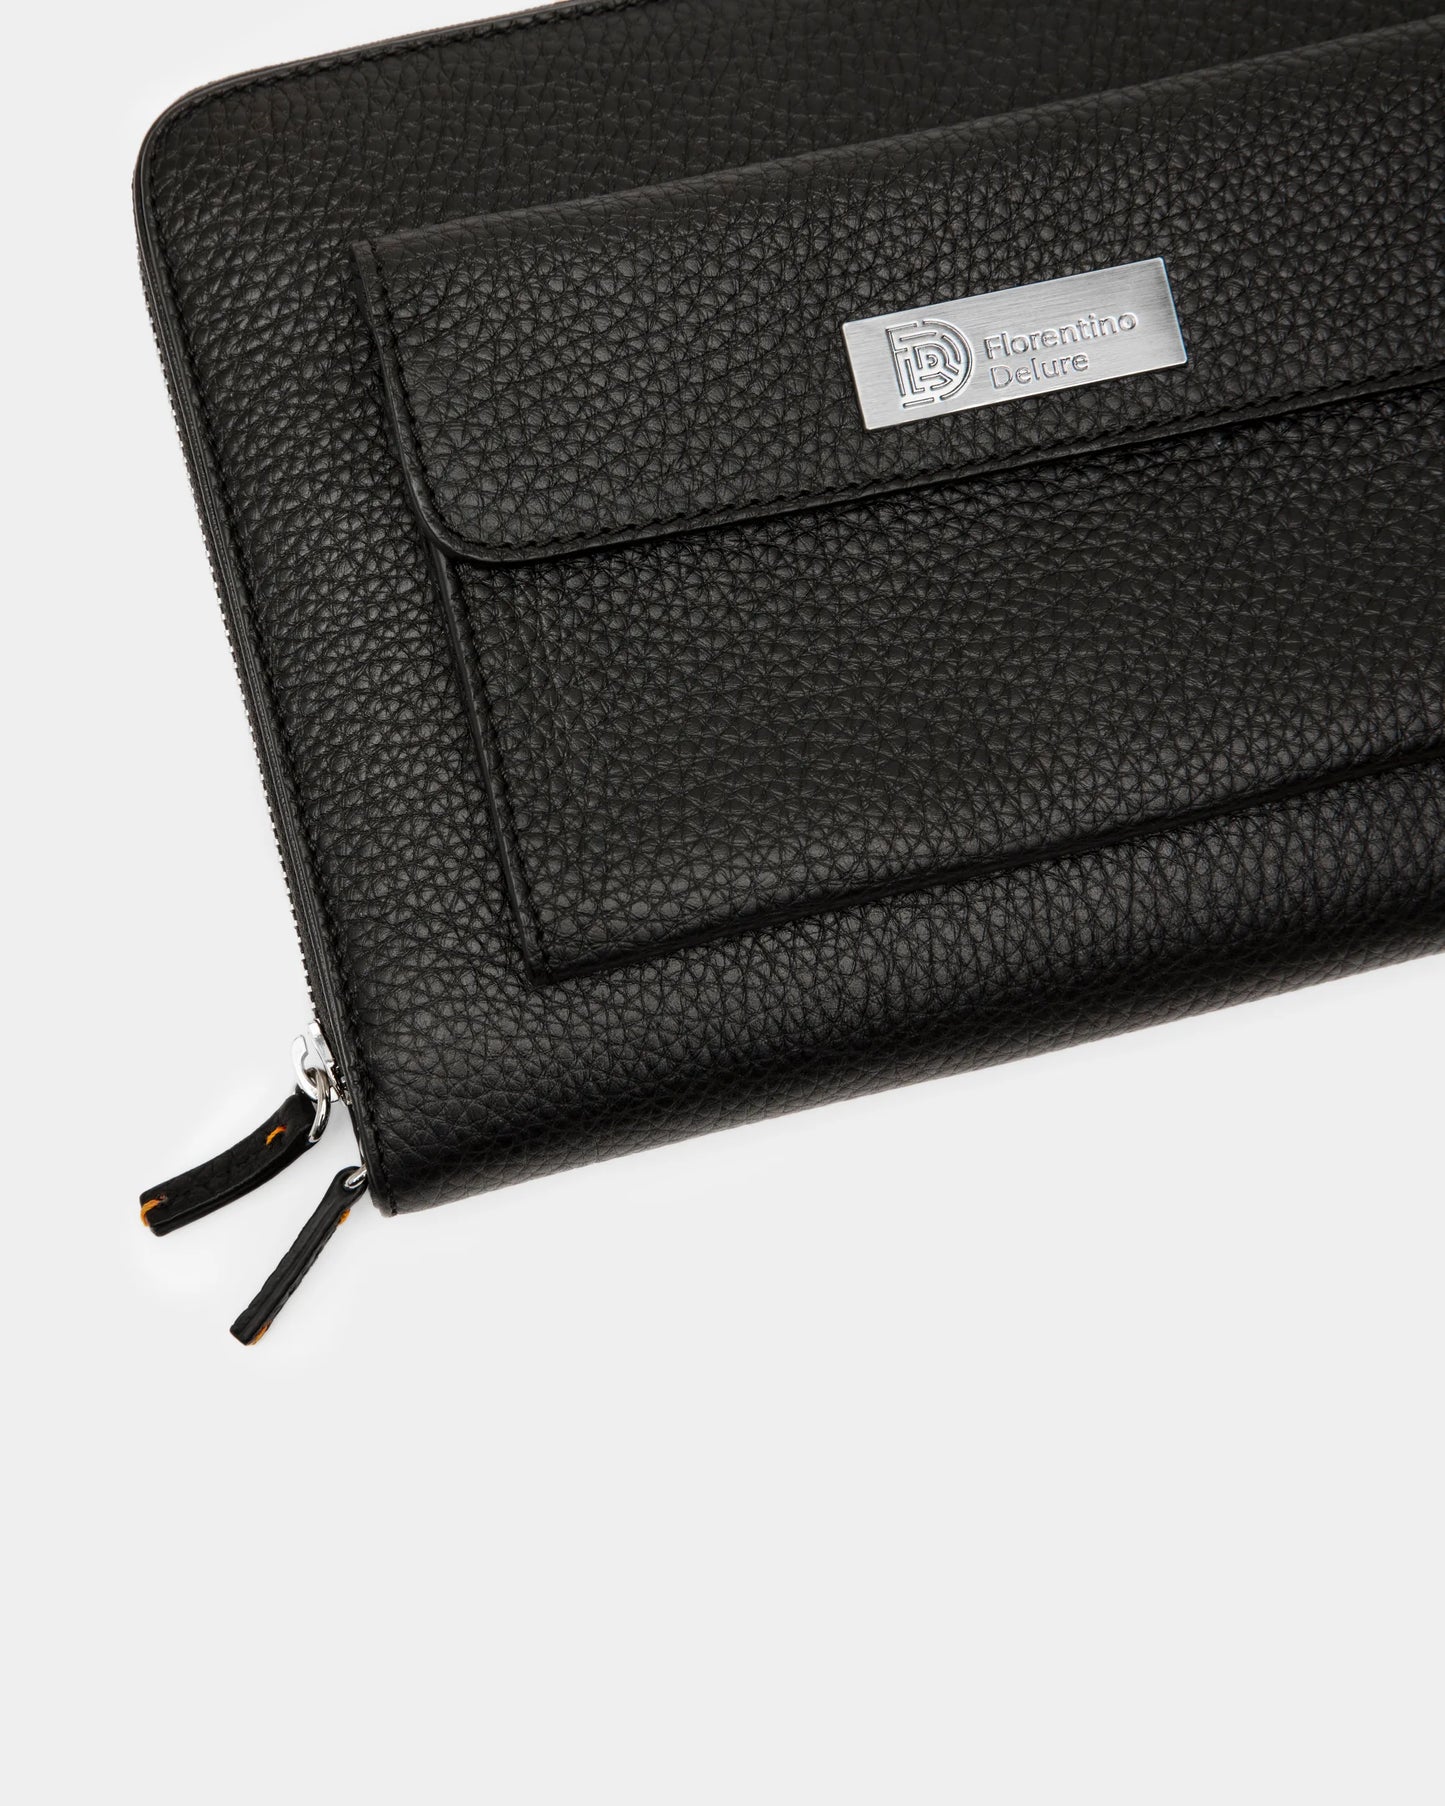 Black Leather Wallet with front pocket